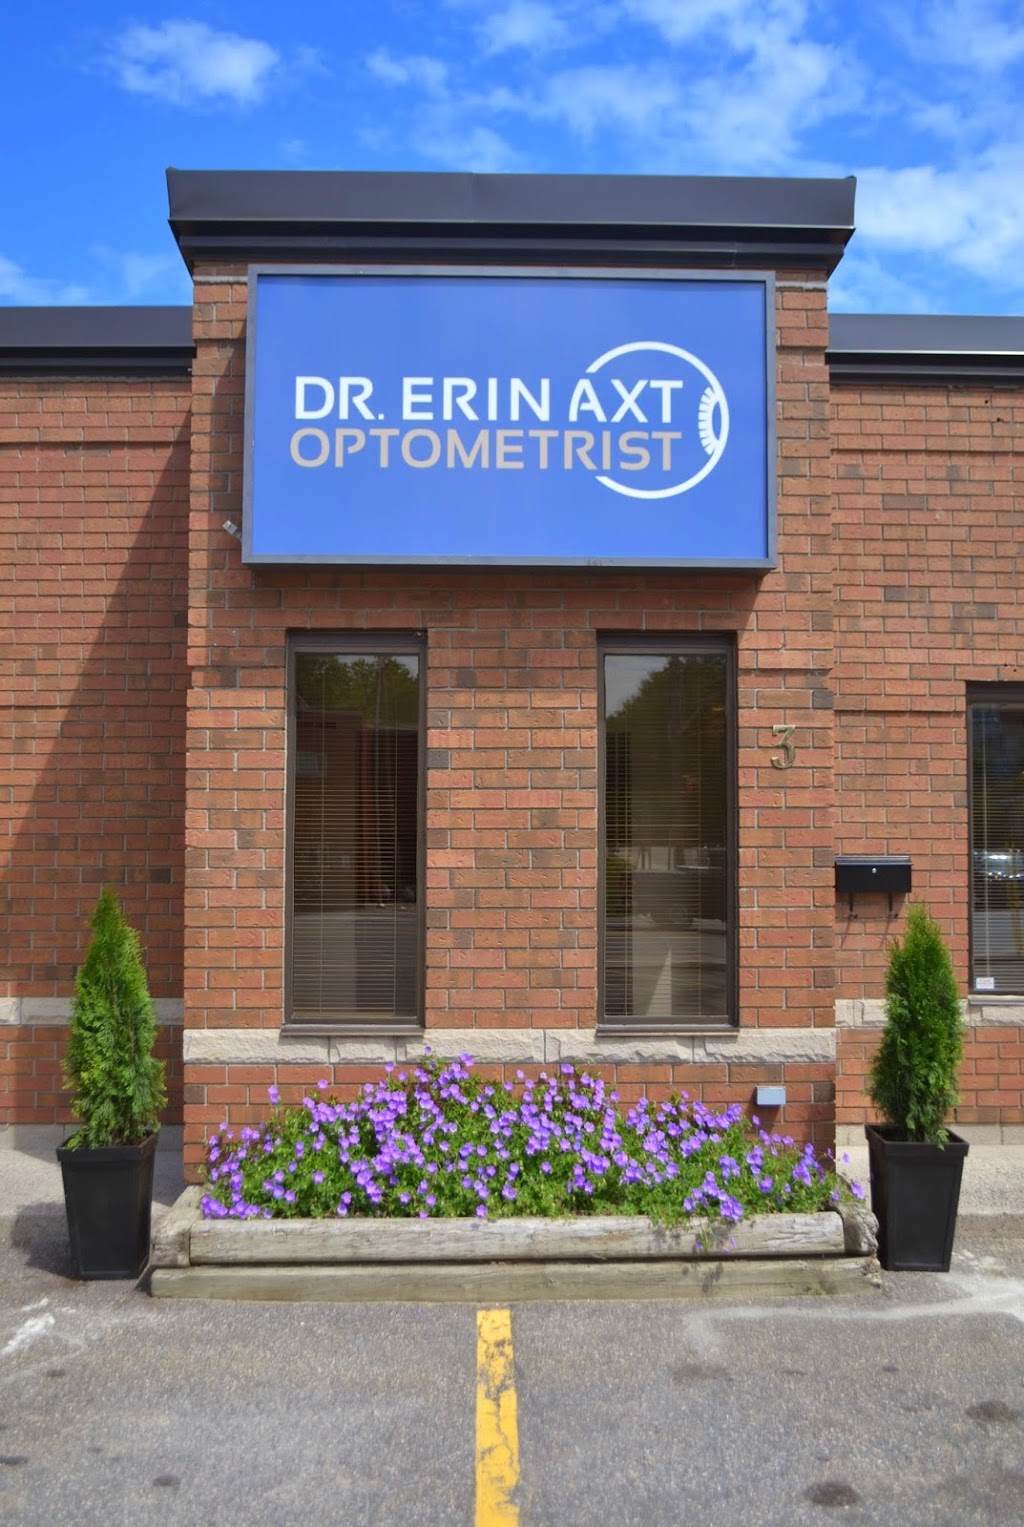 Dr. Erin Axt Optometrist | health | 3 Church St, Parry Sound, ON P2A 1Y2, Canada | 7057461212 OR +1 705-746-1212